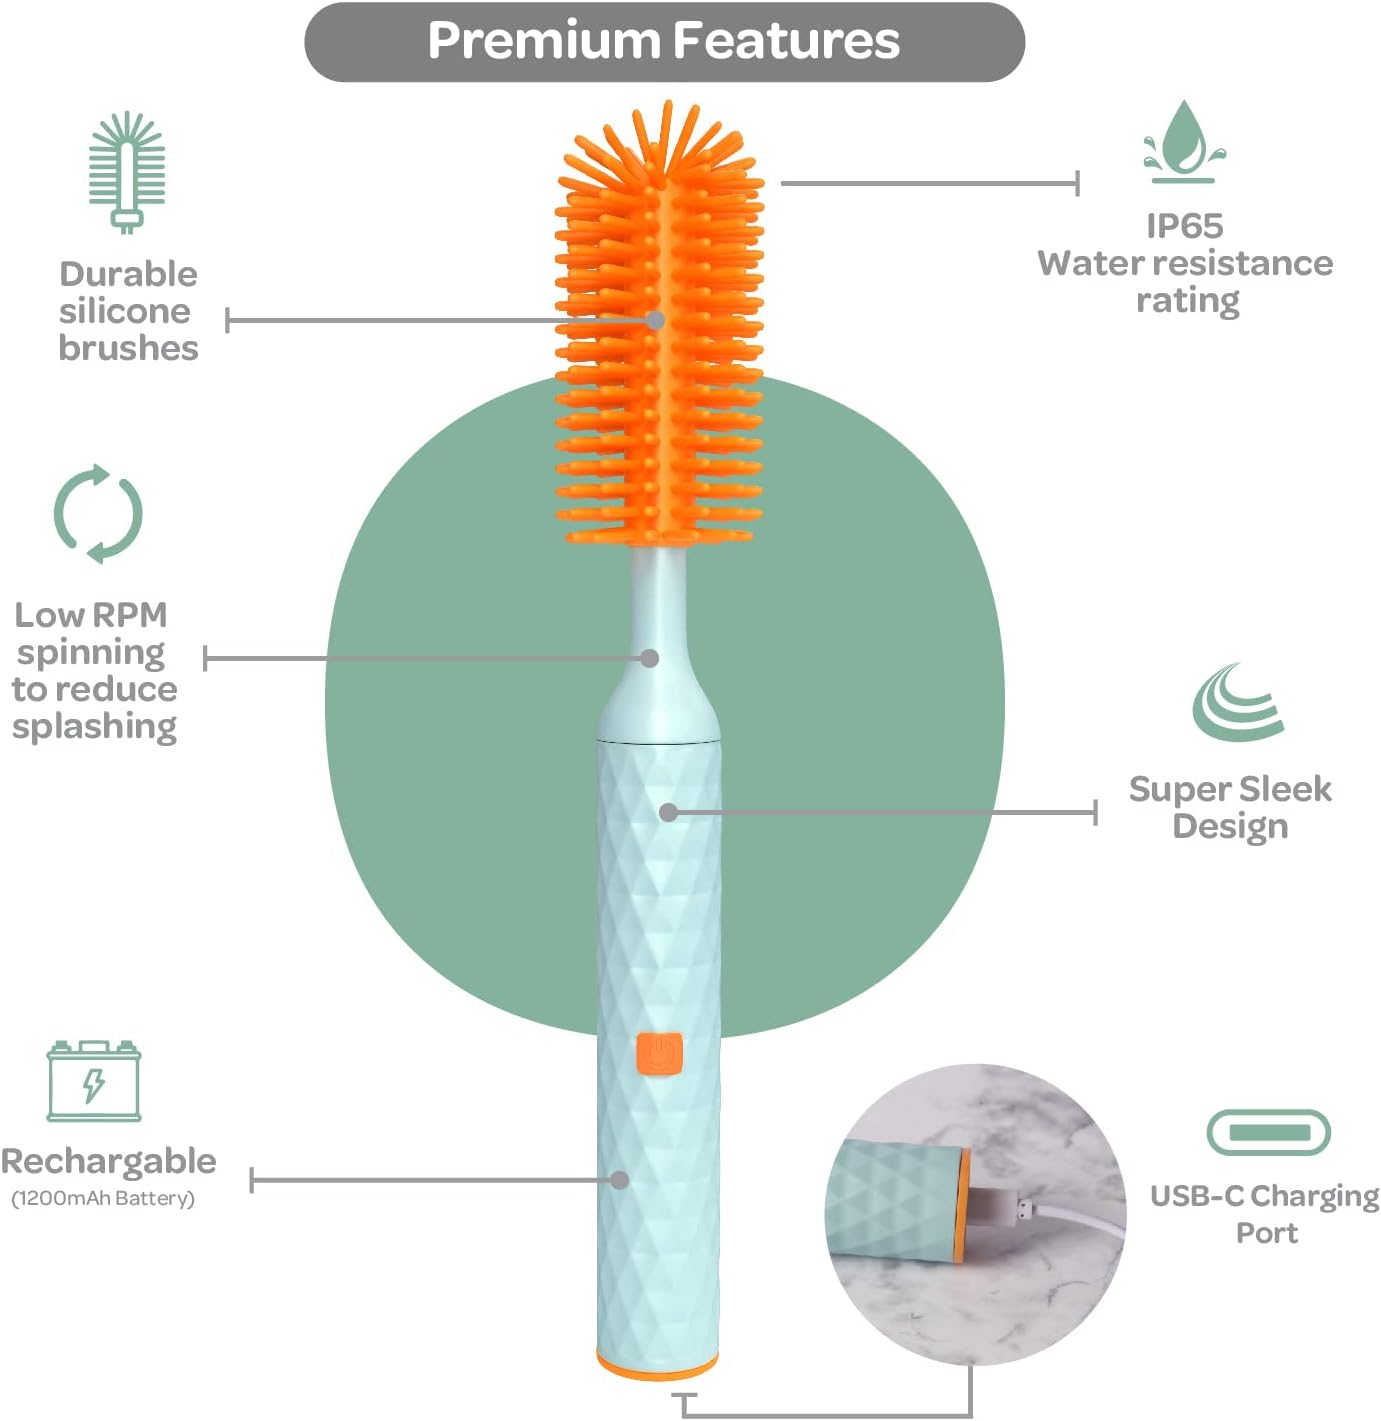 Bottle cleaning brushes